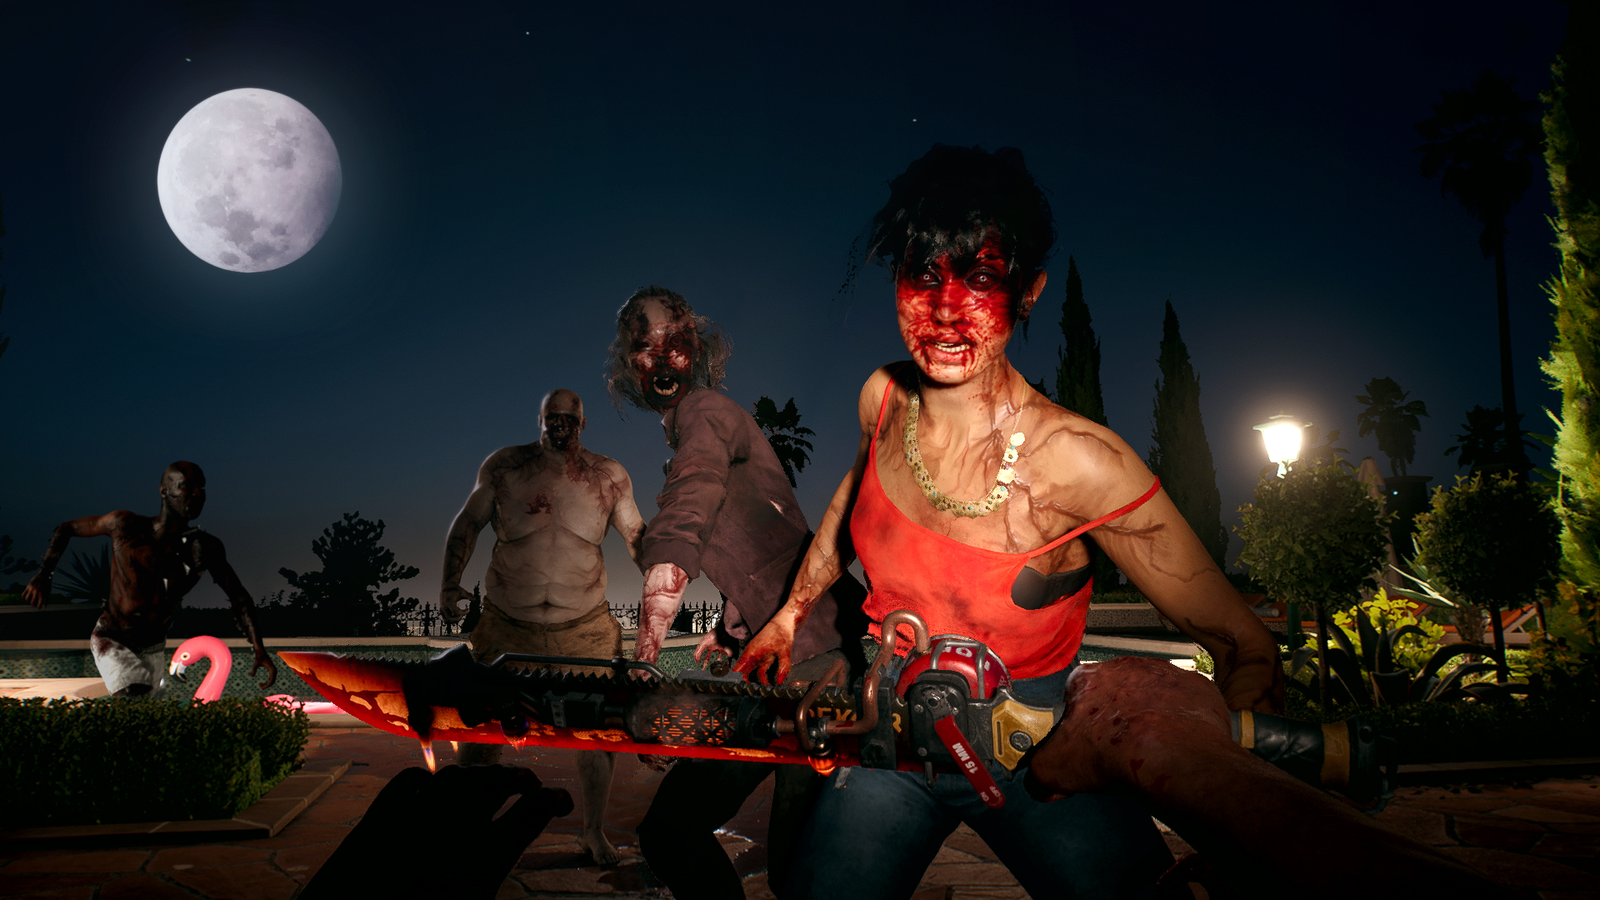 Dead Island 2 review, a bludgeoning zombie sequel